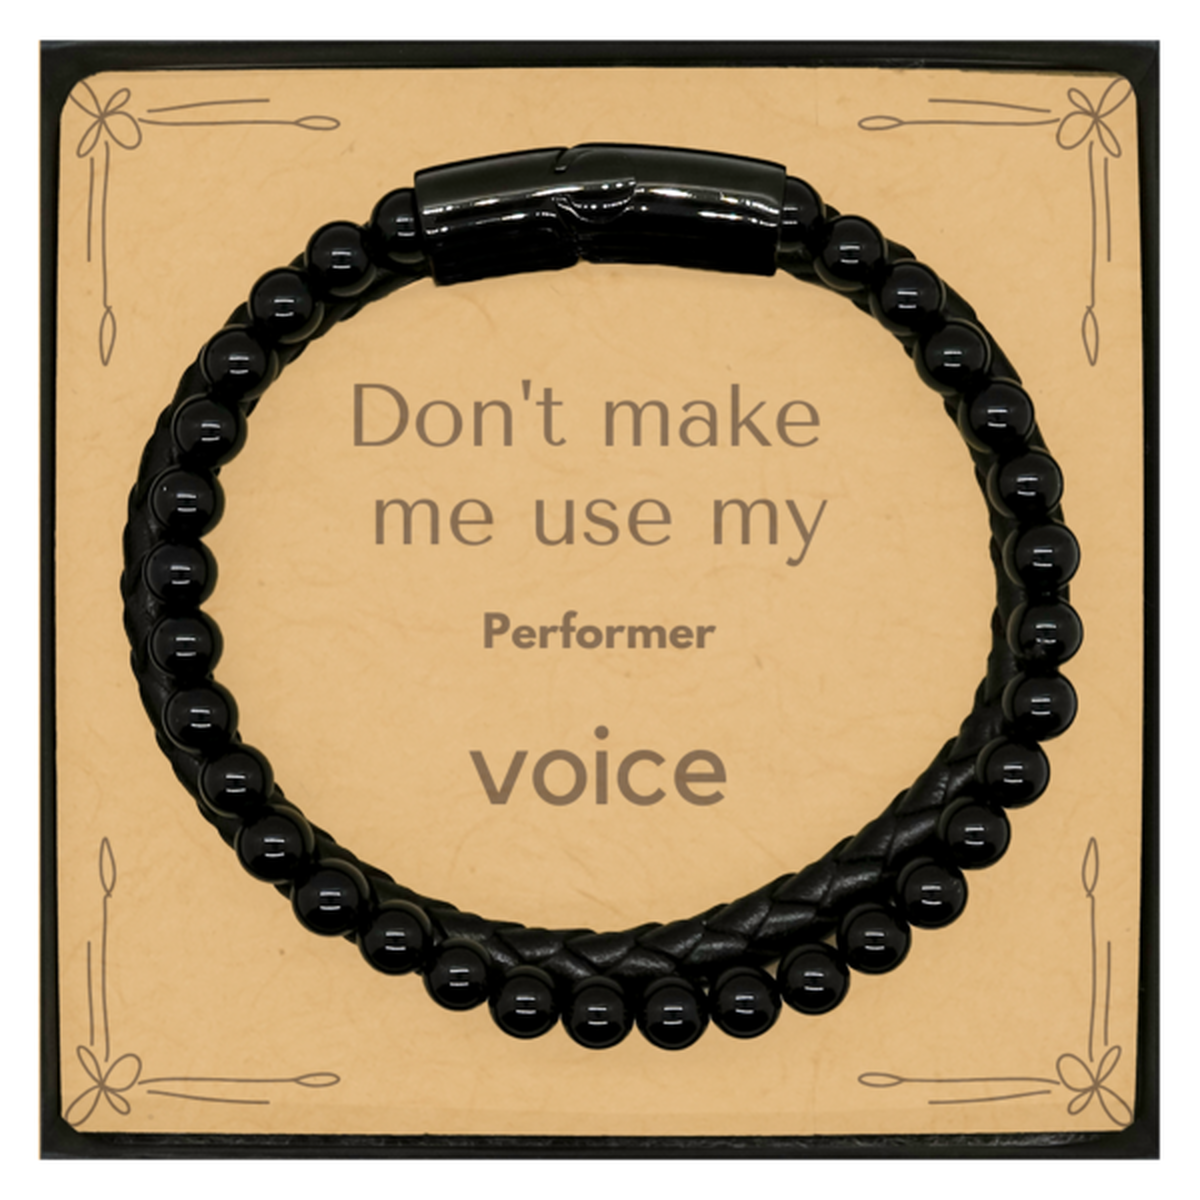 Don't make me use my Performer voice, Sarcasm Performer Card Gifts, Christmas Performer Stone Leather Bracelets Birthday Unique Gifts For Performer Coworkers, Men, Women, Colleague, Friends